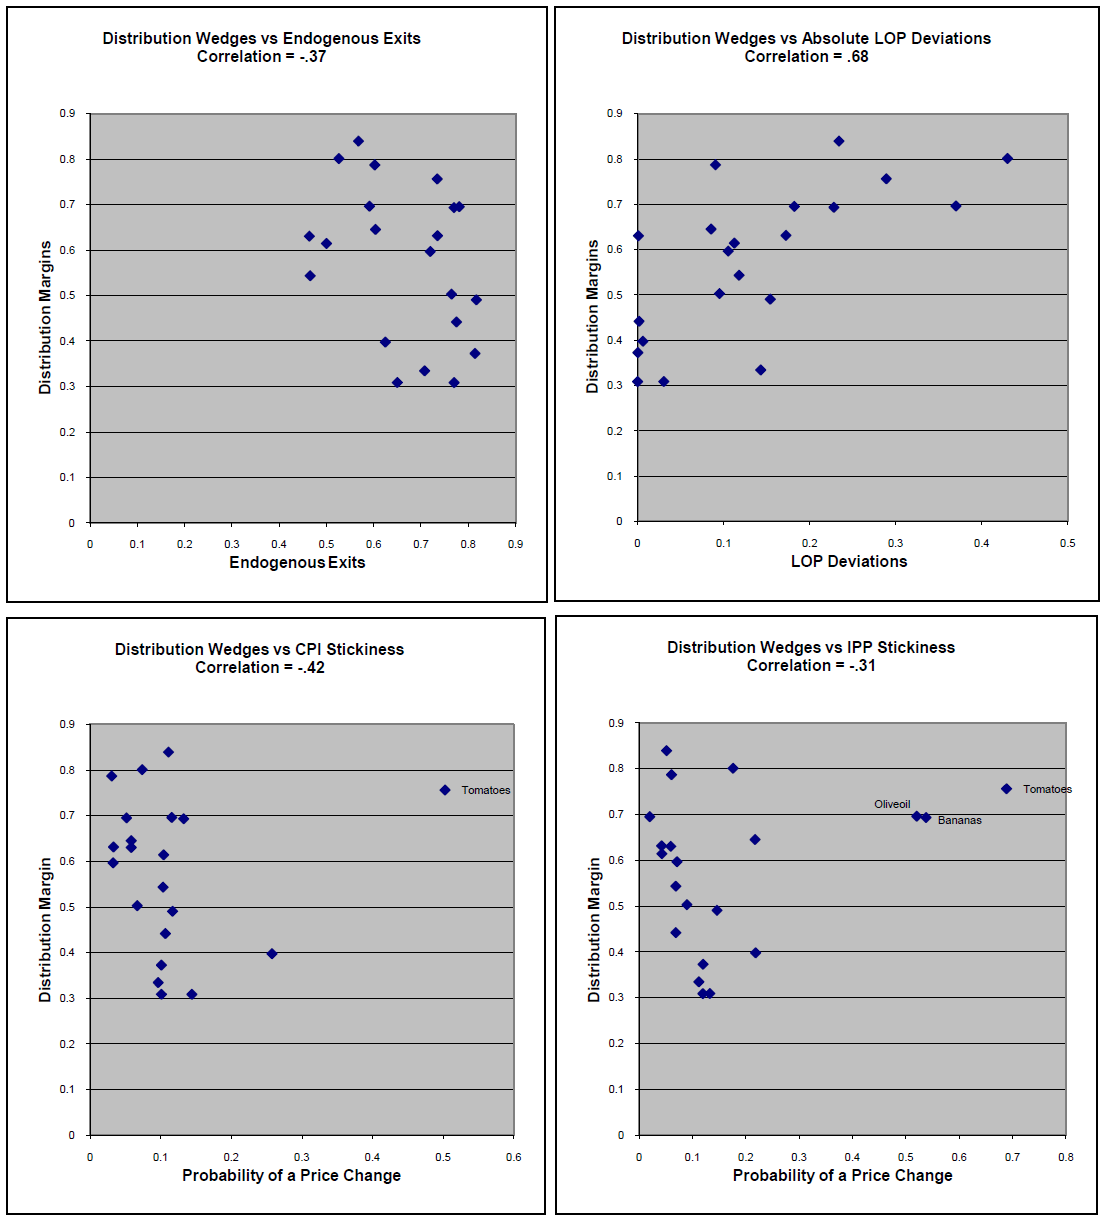 Figure 1: The unconditional relationship between endogenous exits and distribution wedges is displayed in the scatter plot in the upper left panel of Figure 1. Each dot represents a single item category, for example beer. The relationship is negative, with a simple correlation coefficient of -0.37 and no clear outlier observations. 

The relationship between distribution wedges and absolute law of one price deviations is depicted in the upper right panel of the figure 1.  Distribution wedges are on y axis with law of one price deviations on the x-axis.

The relationship between distribution wedges and CPI price stickiness is depicted in the lower left panel of the figure 1.  Distribution wedges are on y axis with probability of a CPI price change on the x-axis.

The relationship between distribution wedges and IPP  price stickiness is depicted in the lower right panel of the figure 1.  Distribution wedges are on y axis with probability of a IPP price change on the x-axis.